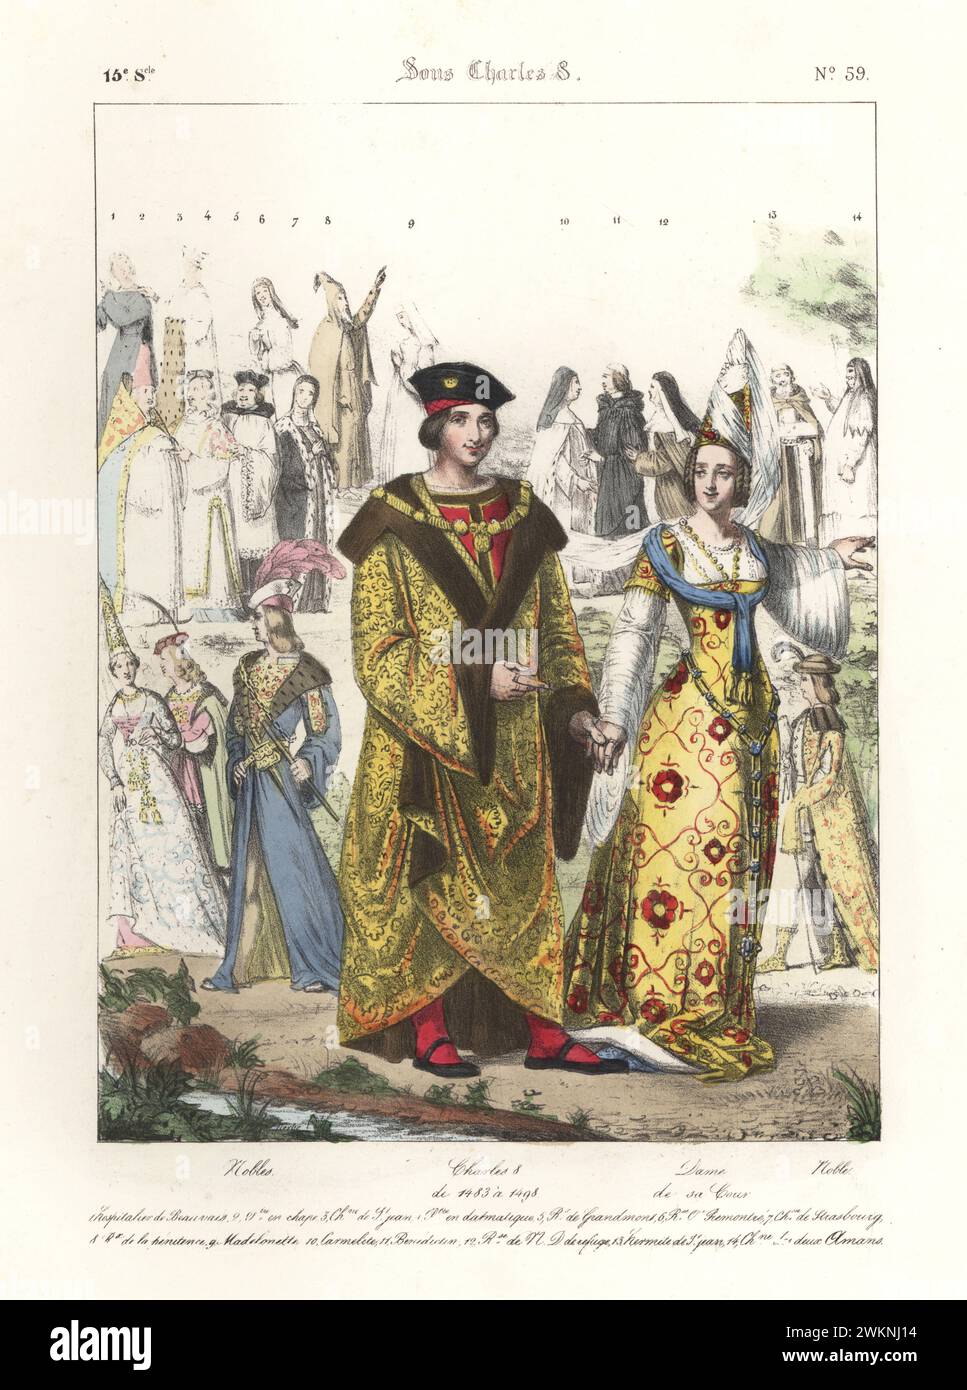 King Charles VIII of France in long fur-lined, gold-embroidered houppeland, courtier in hennin headdress, embroidered robe. Nobles, Charles VIII, Dame de sa cour, Noble. Sous Charles 8. Handcoloured lithograph by Godard after an illustration by Charles Auguste Herbé from his own Costumes Francais, Civils, Militaires et Religieux, French Costumes, Civil, Military and Religious, Maison Martinet, Paris, 1837. Stock Photo